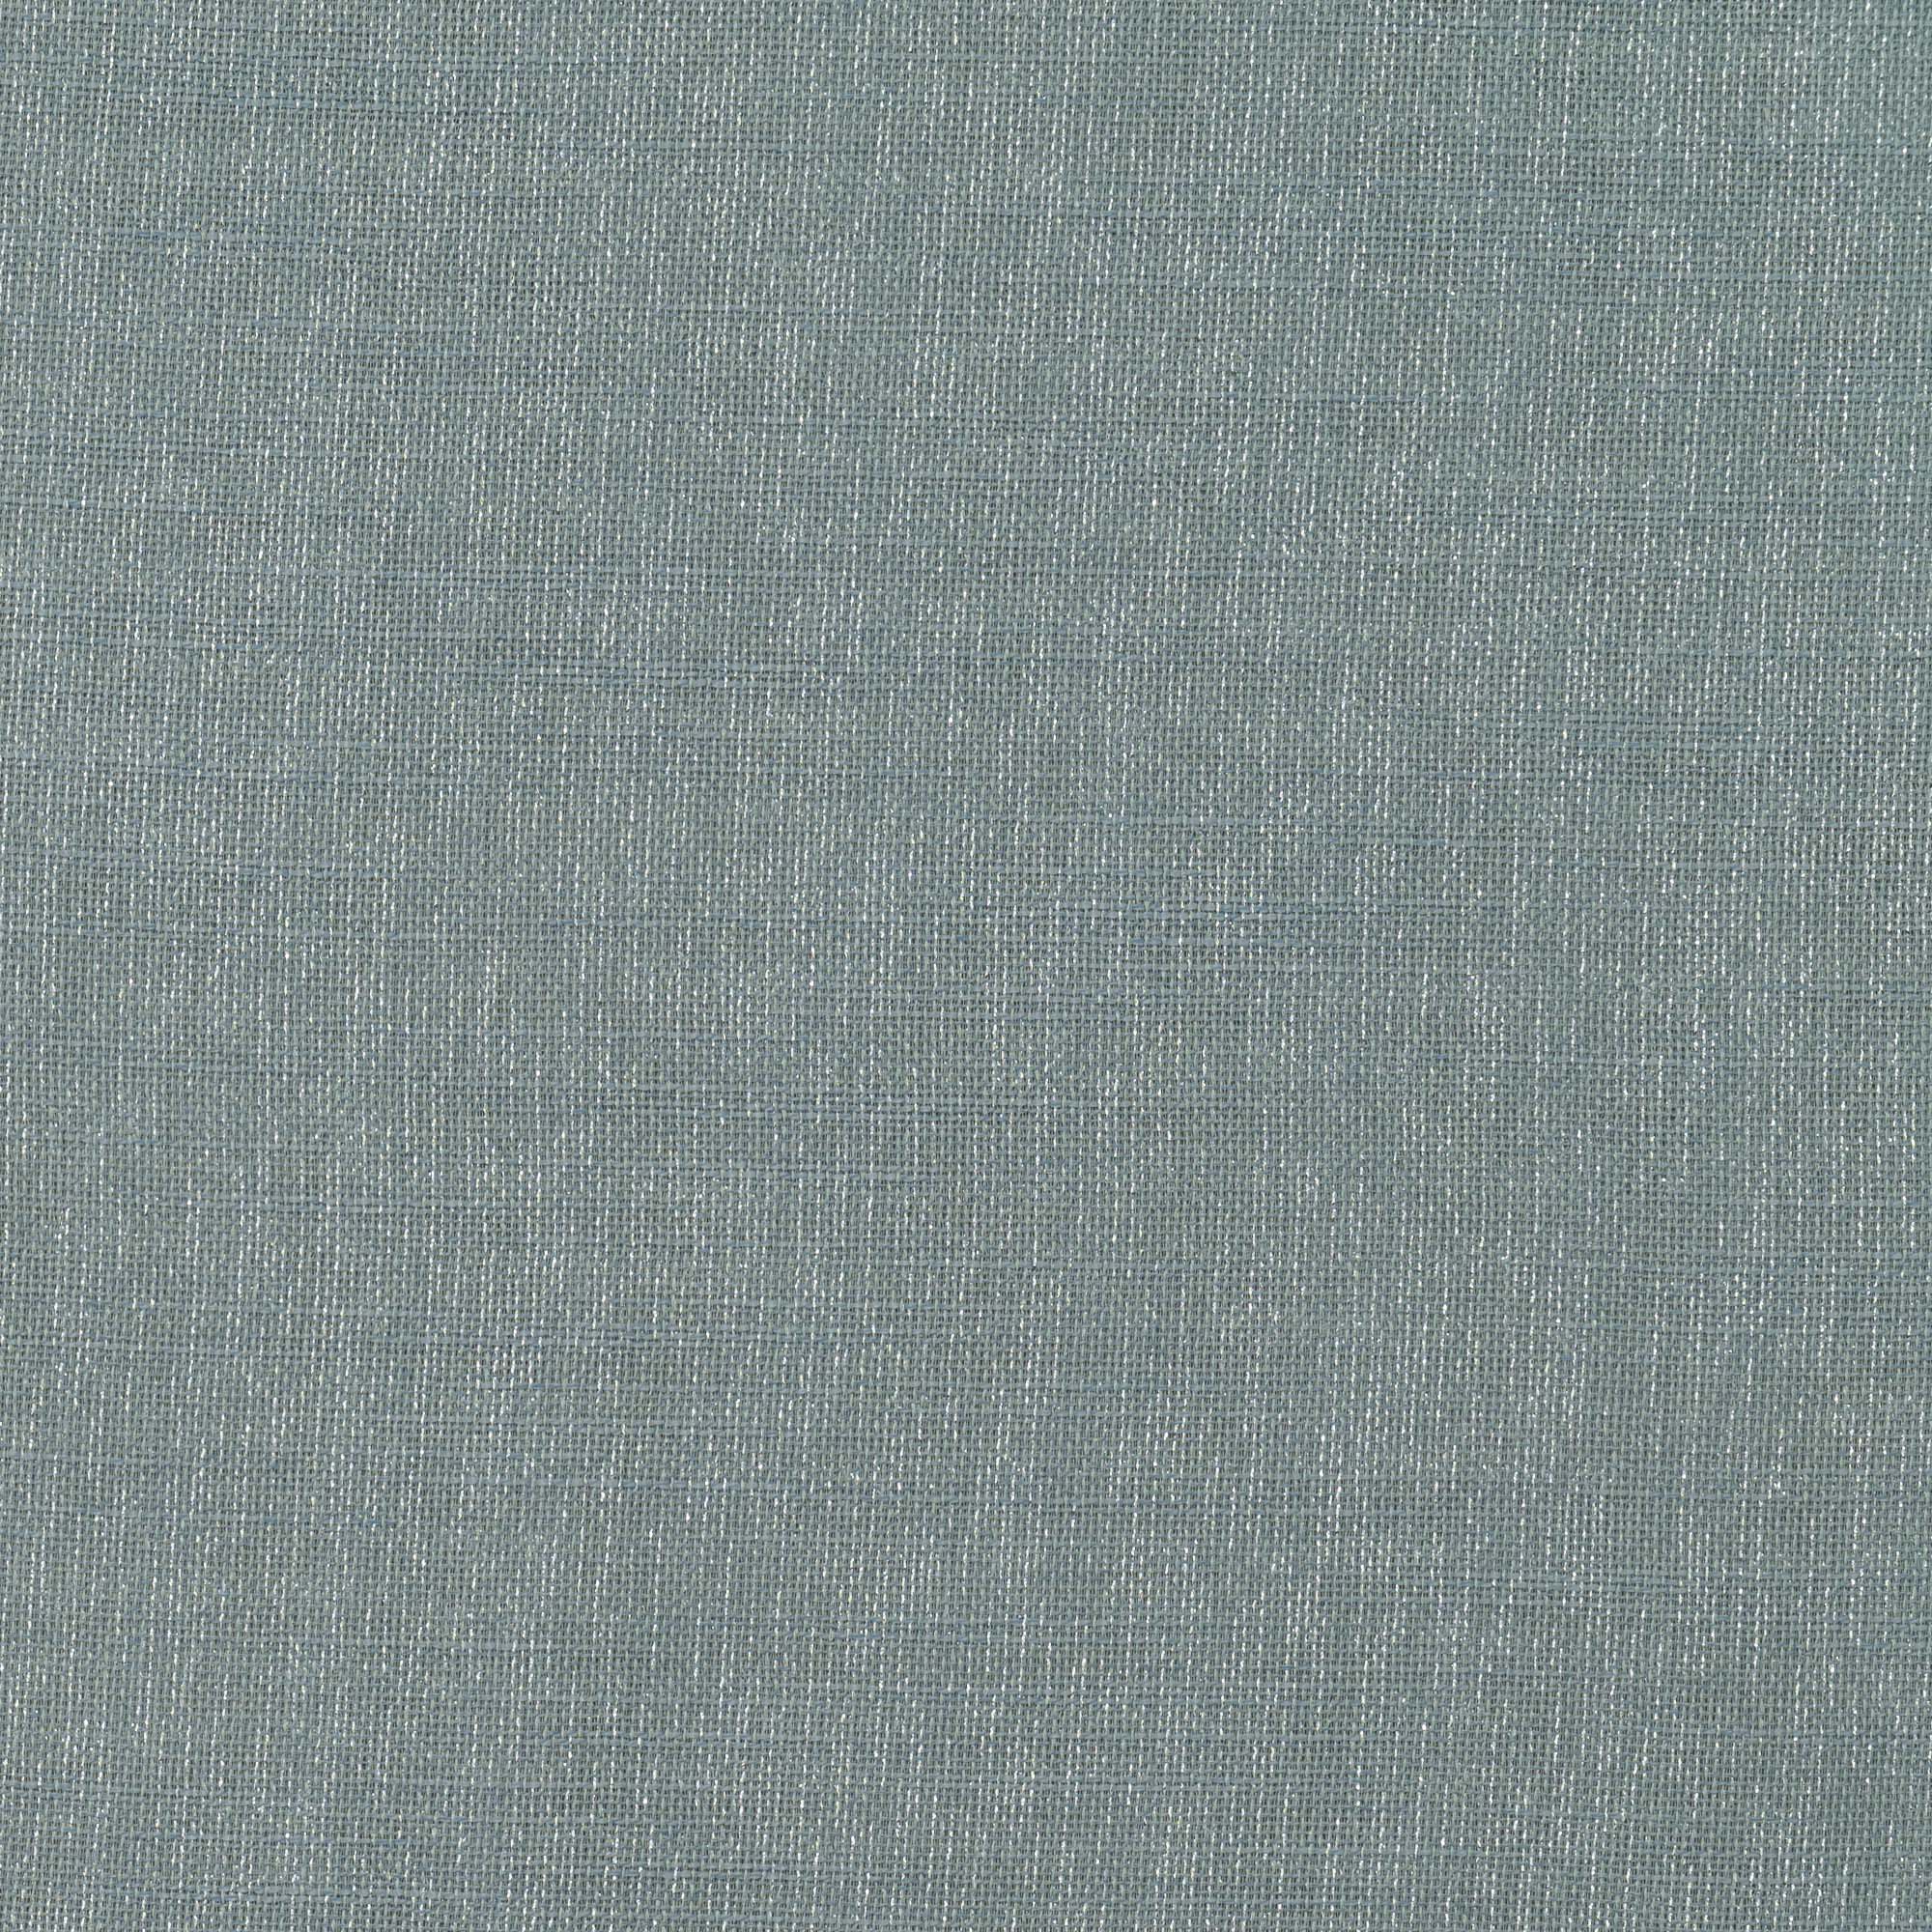 Spark Mineral Fabric